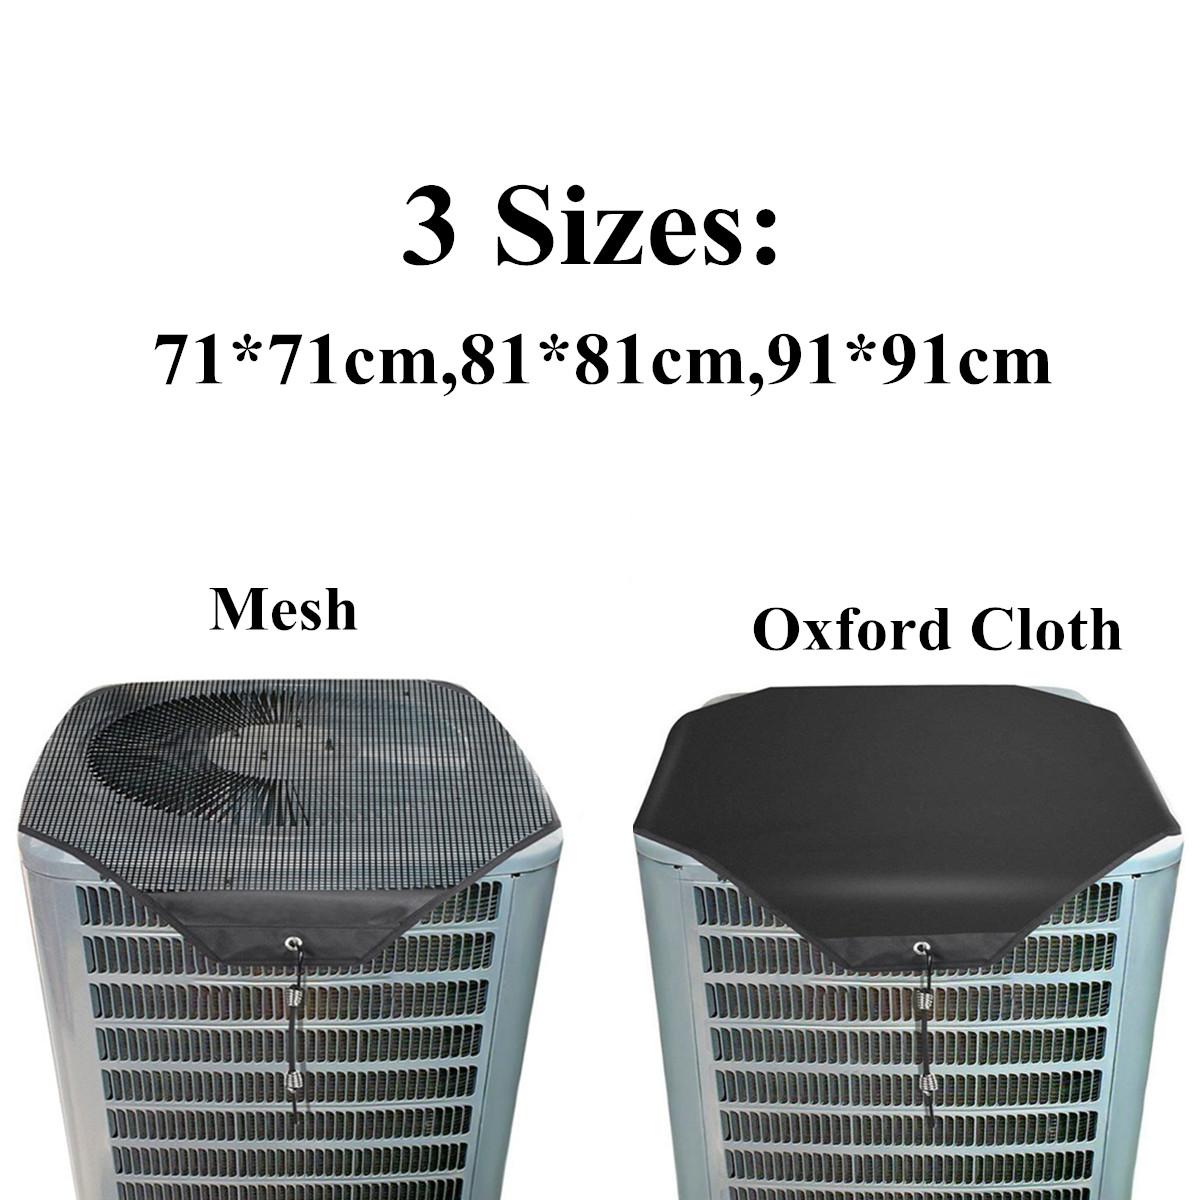 Air Conditioner Cover Outdoor Mesh Waterproof Oxford Cloth Protective Cover Dust Net Cooling Fan Cover